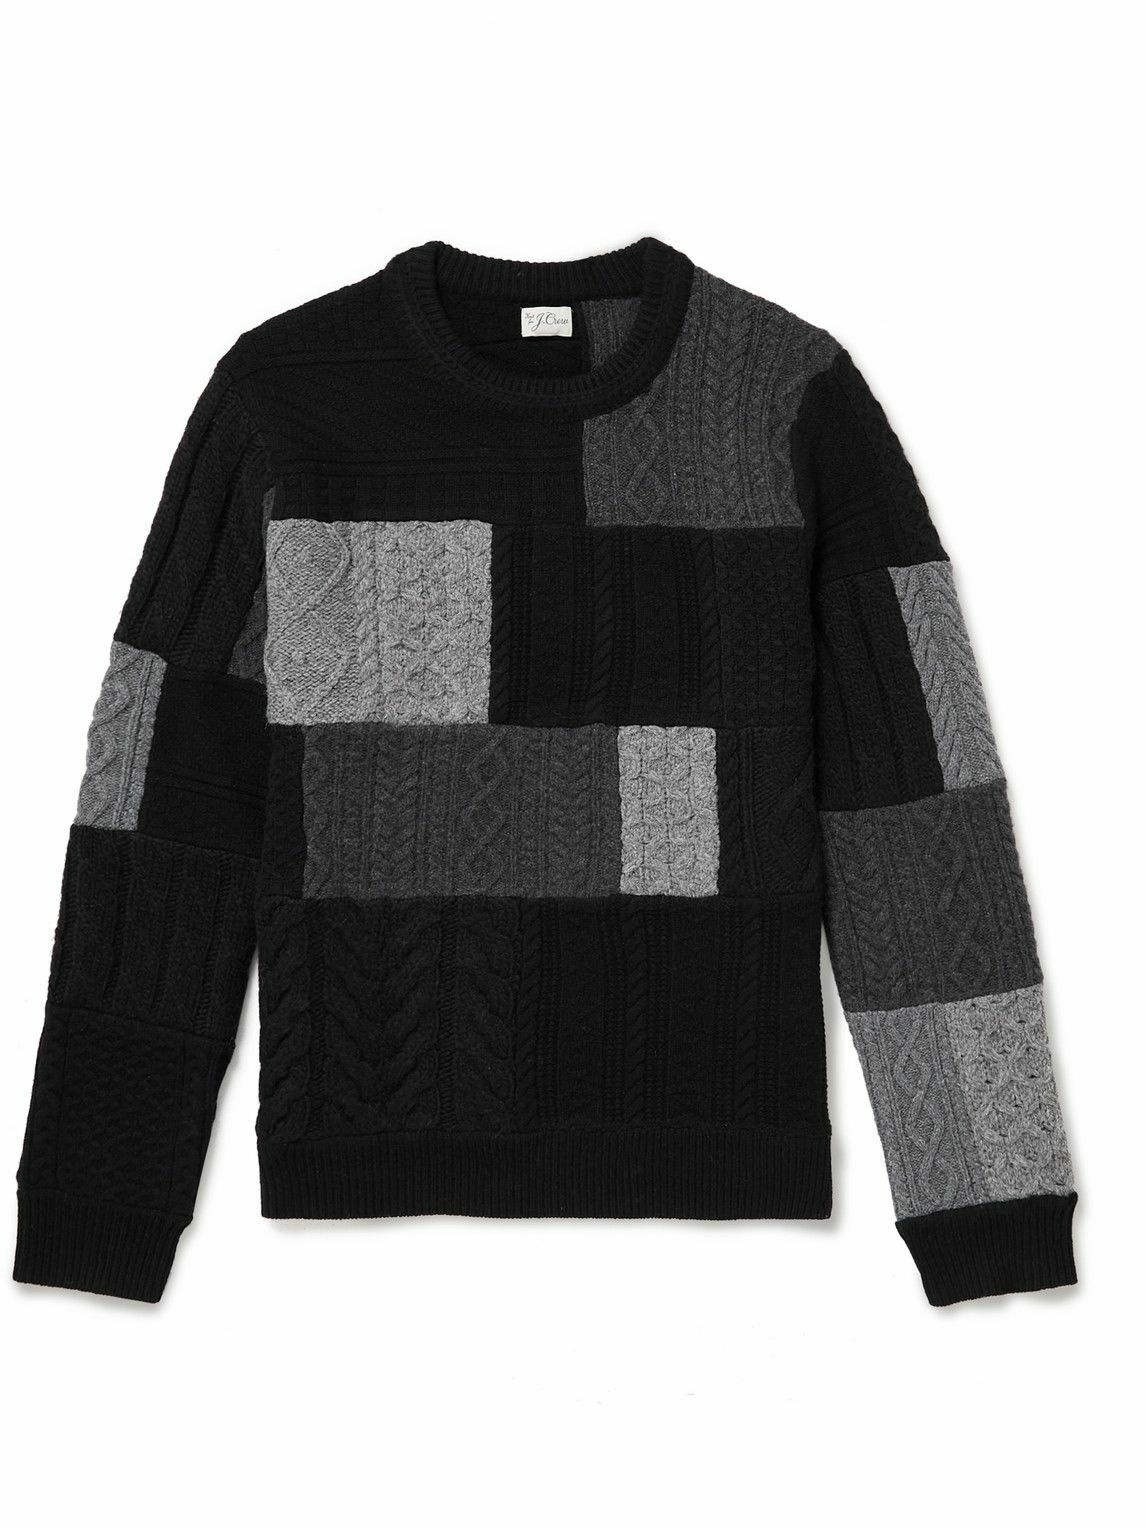 Photo: J.Crew - Patchwork Cable-Knit Wool and Cashmere-Blend Sweater - Black